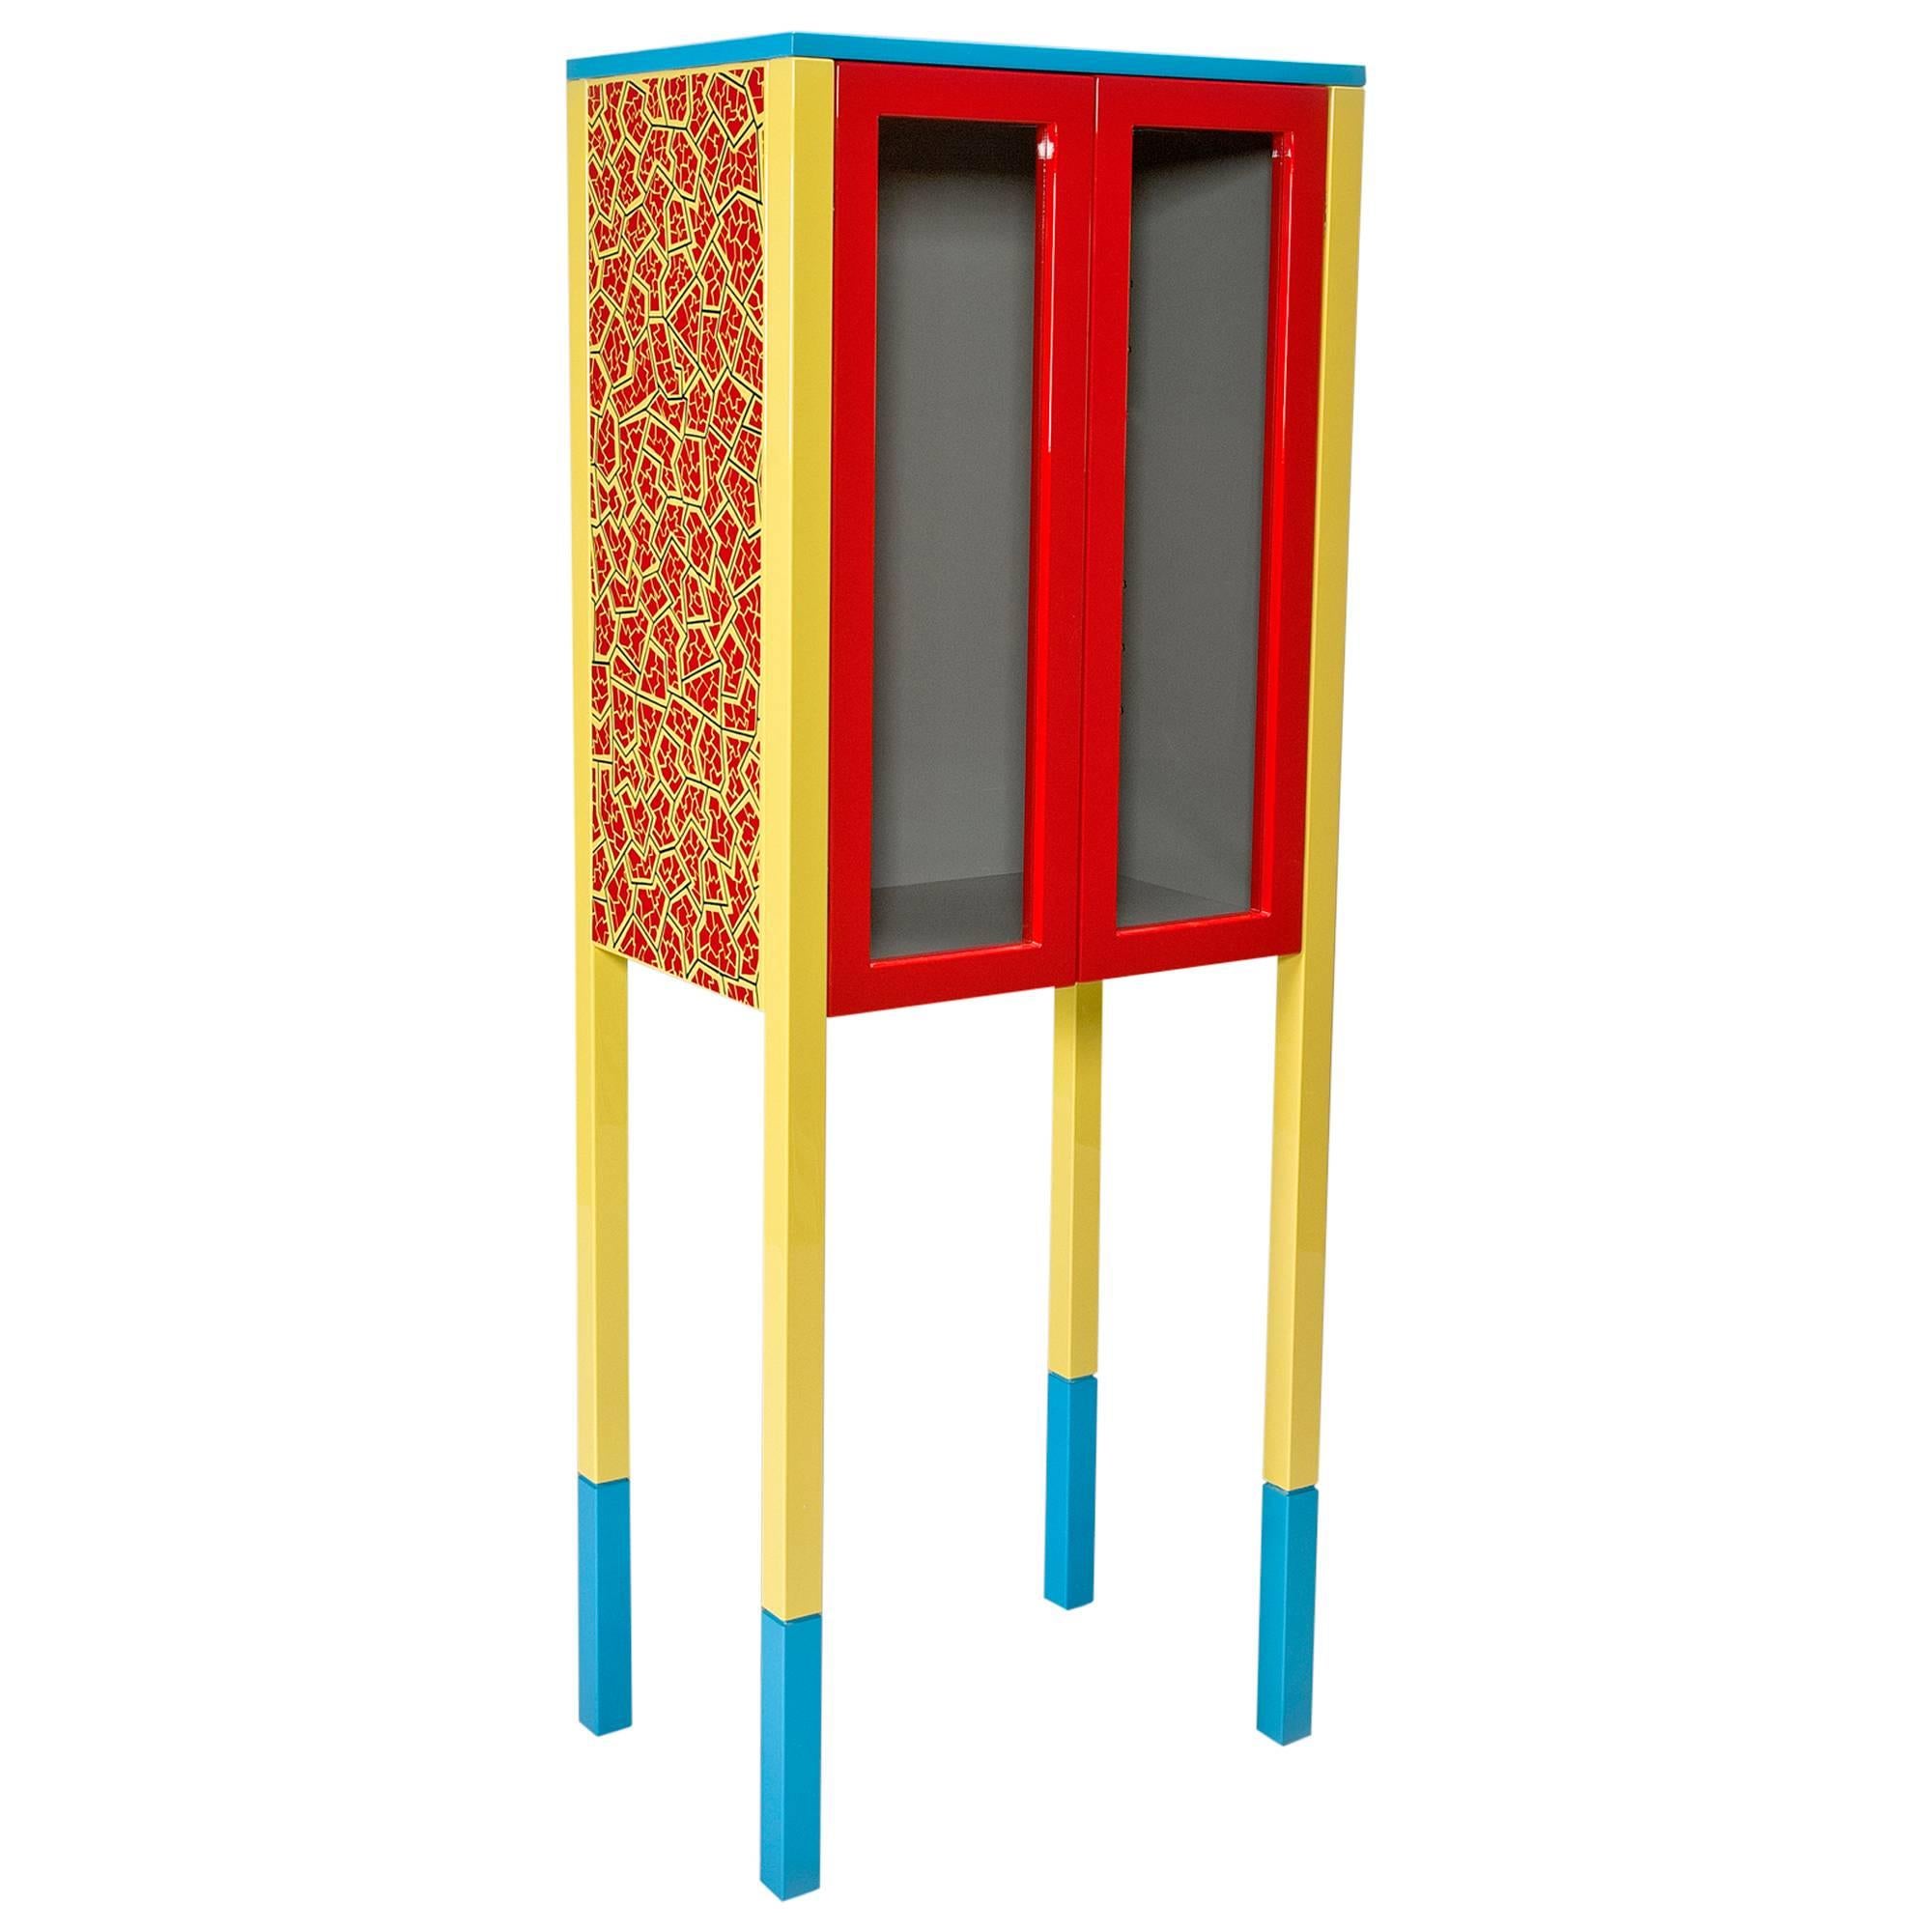 D'Antibes Cabinet by George Sowden for Memphis